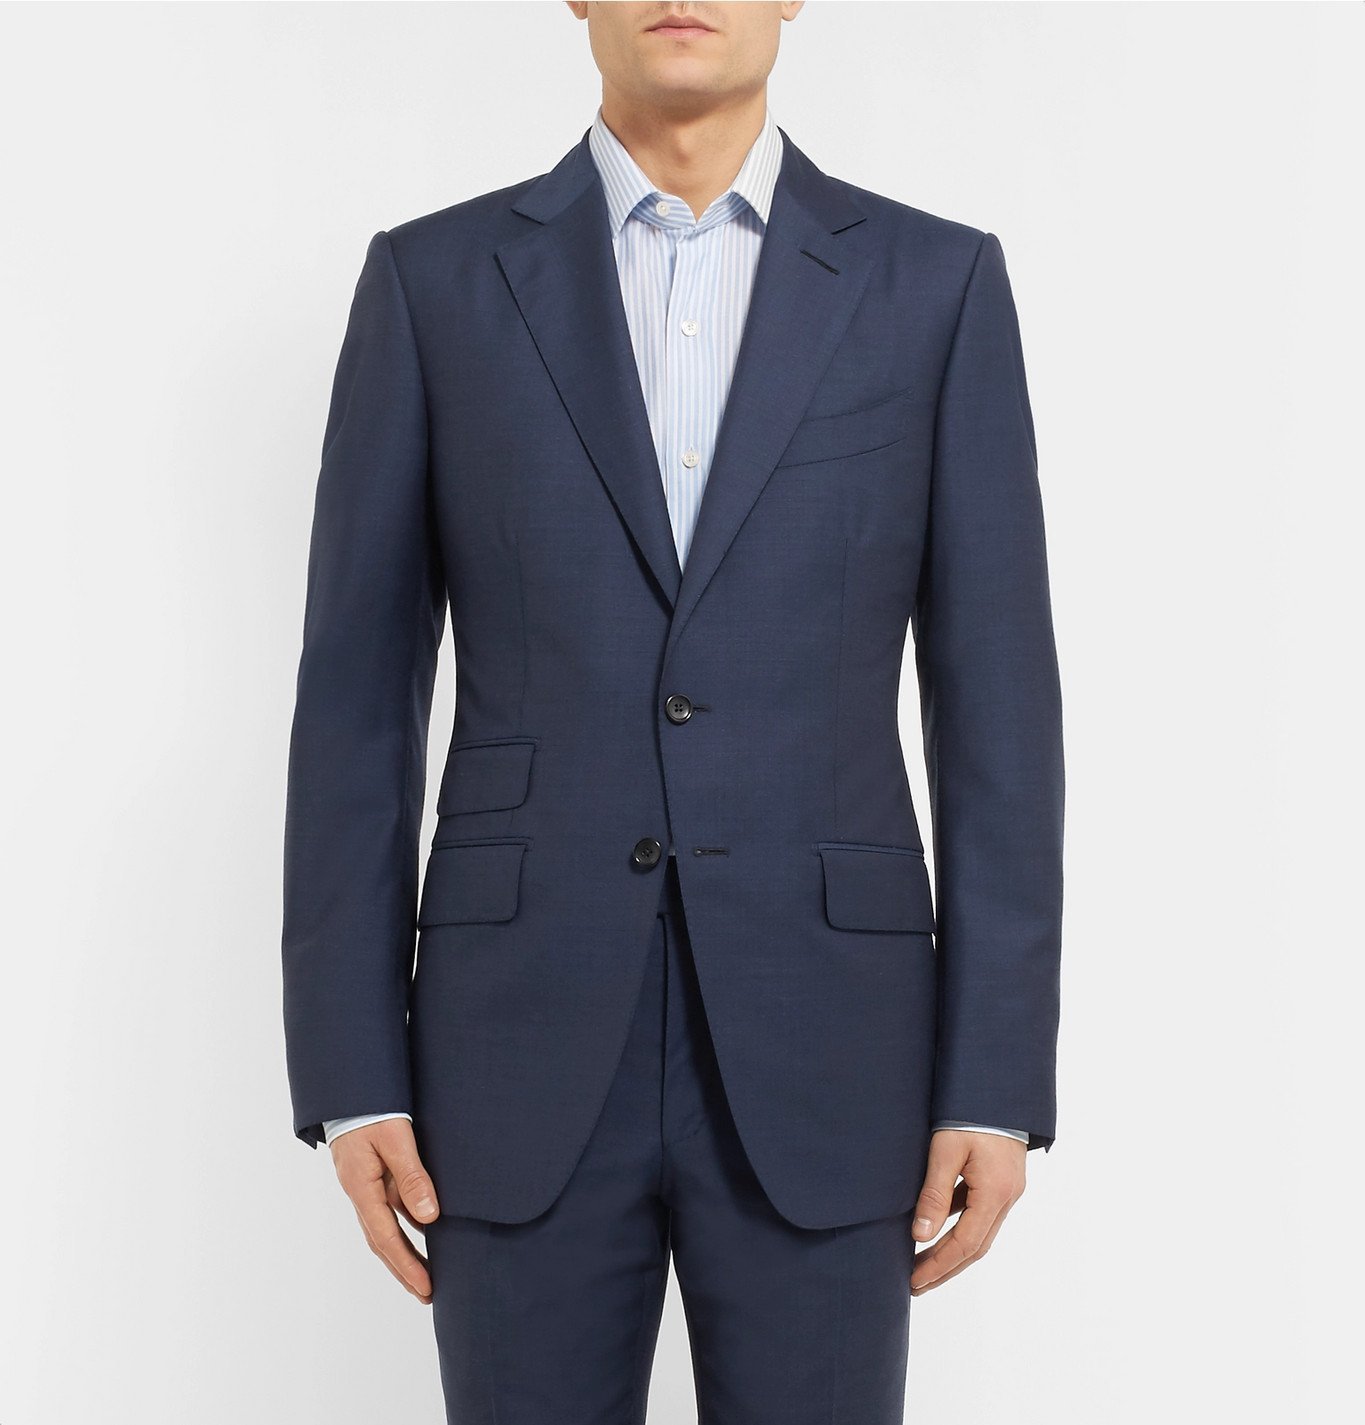 TOM FORD - Navy O'Connor Slim-Fit Wool Suit Jacket - Blue TOM FORD